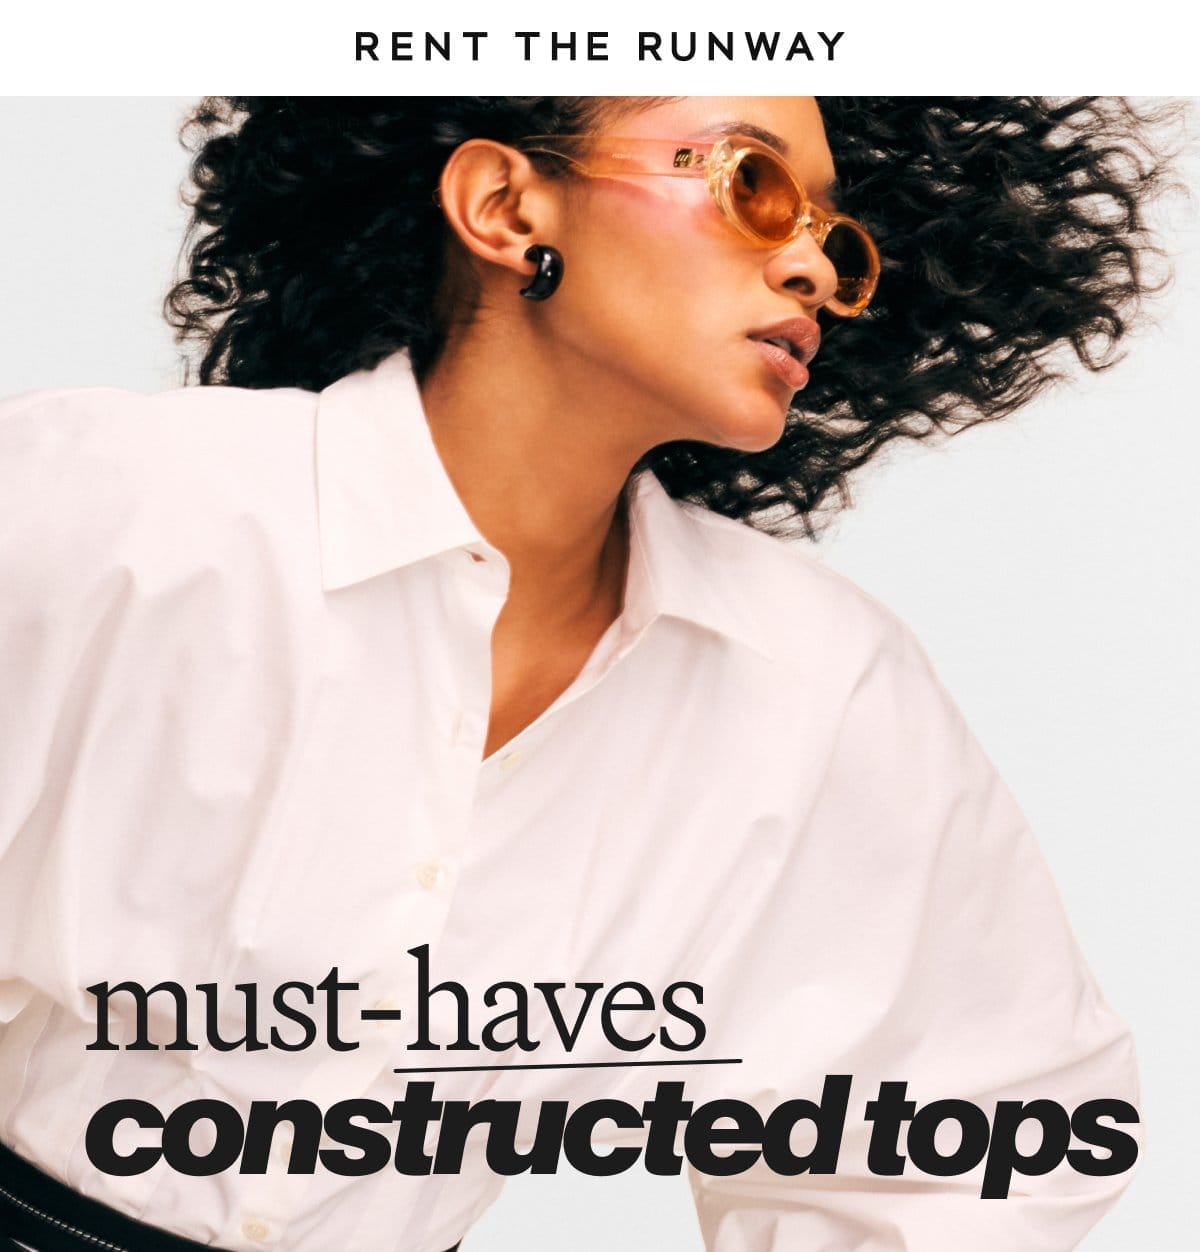 Must haves constructed tops